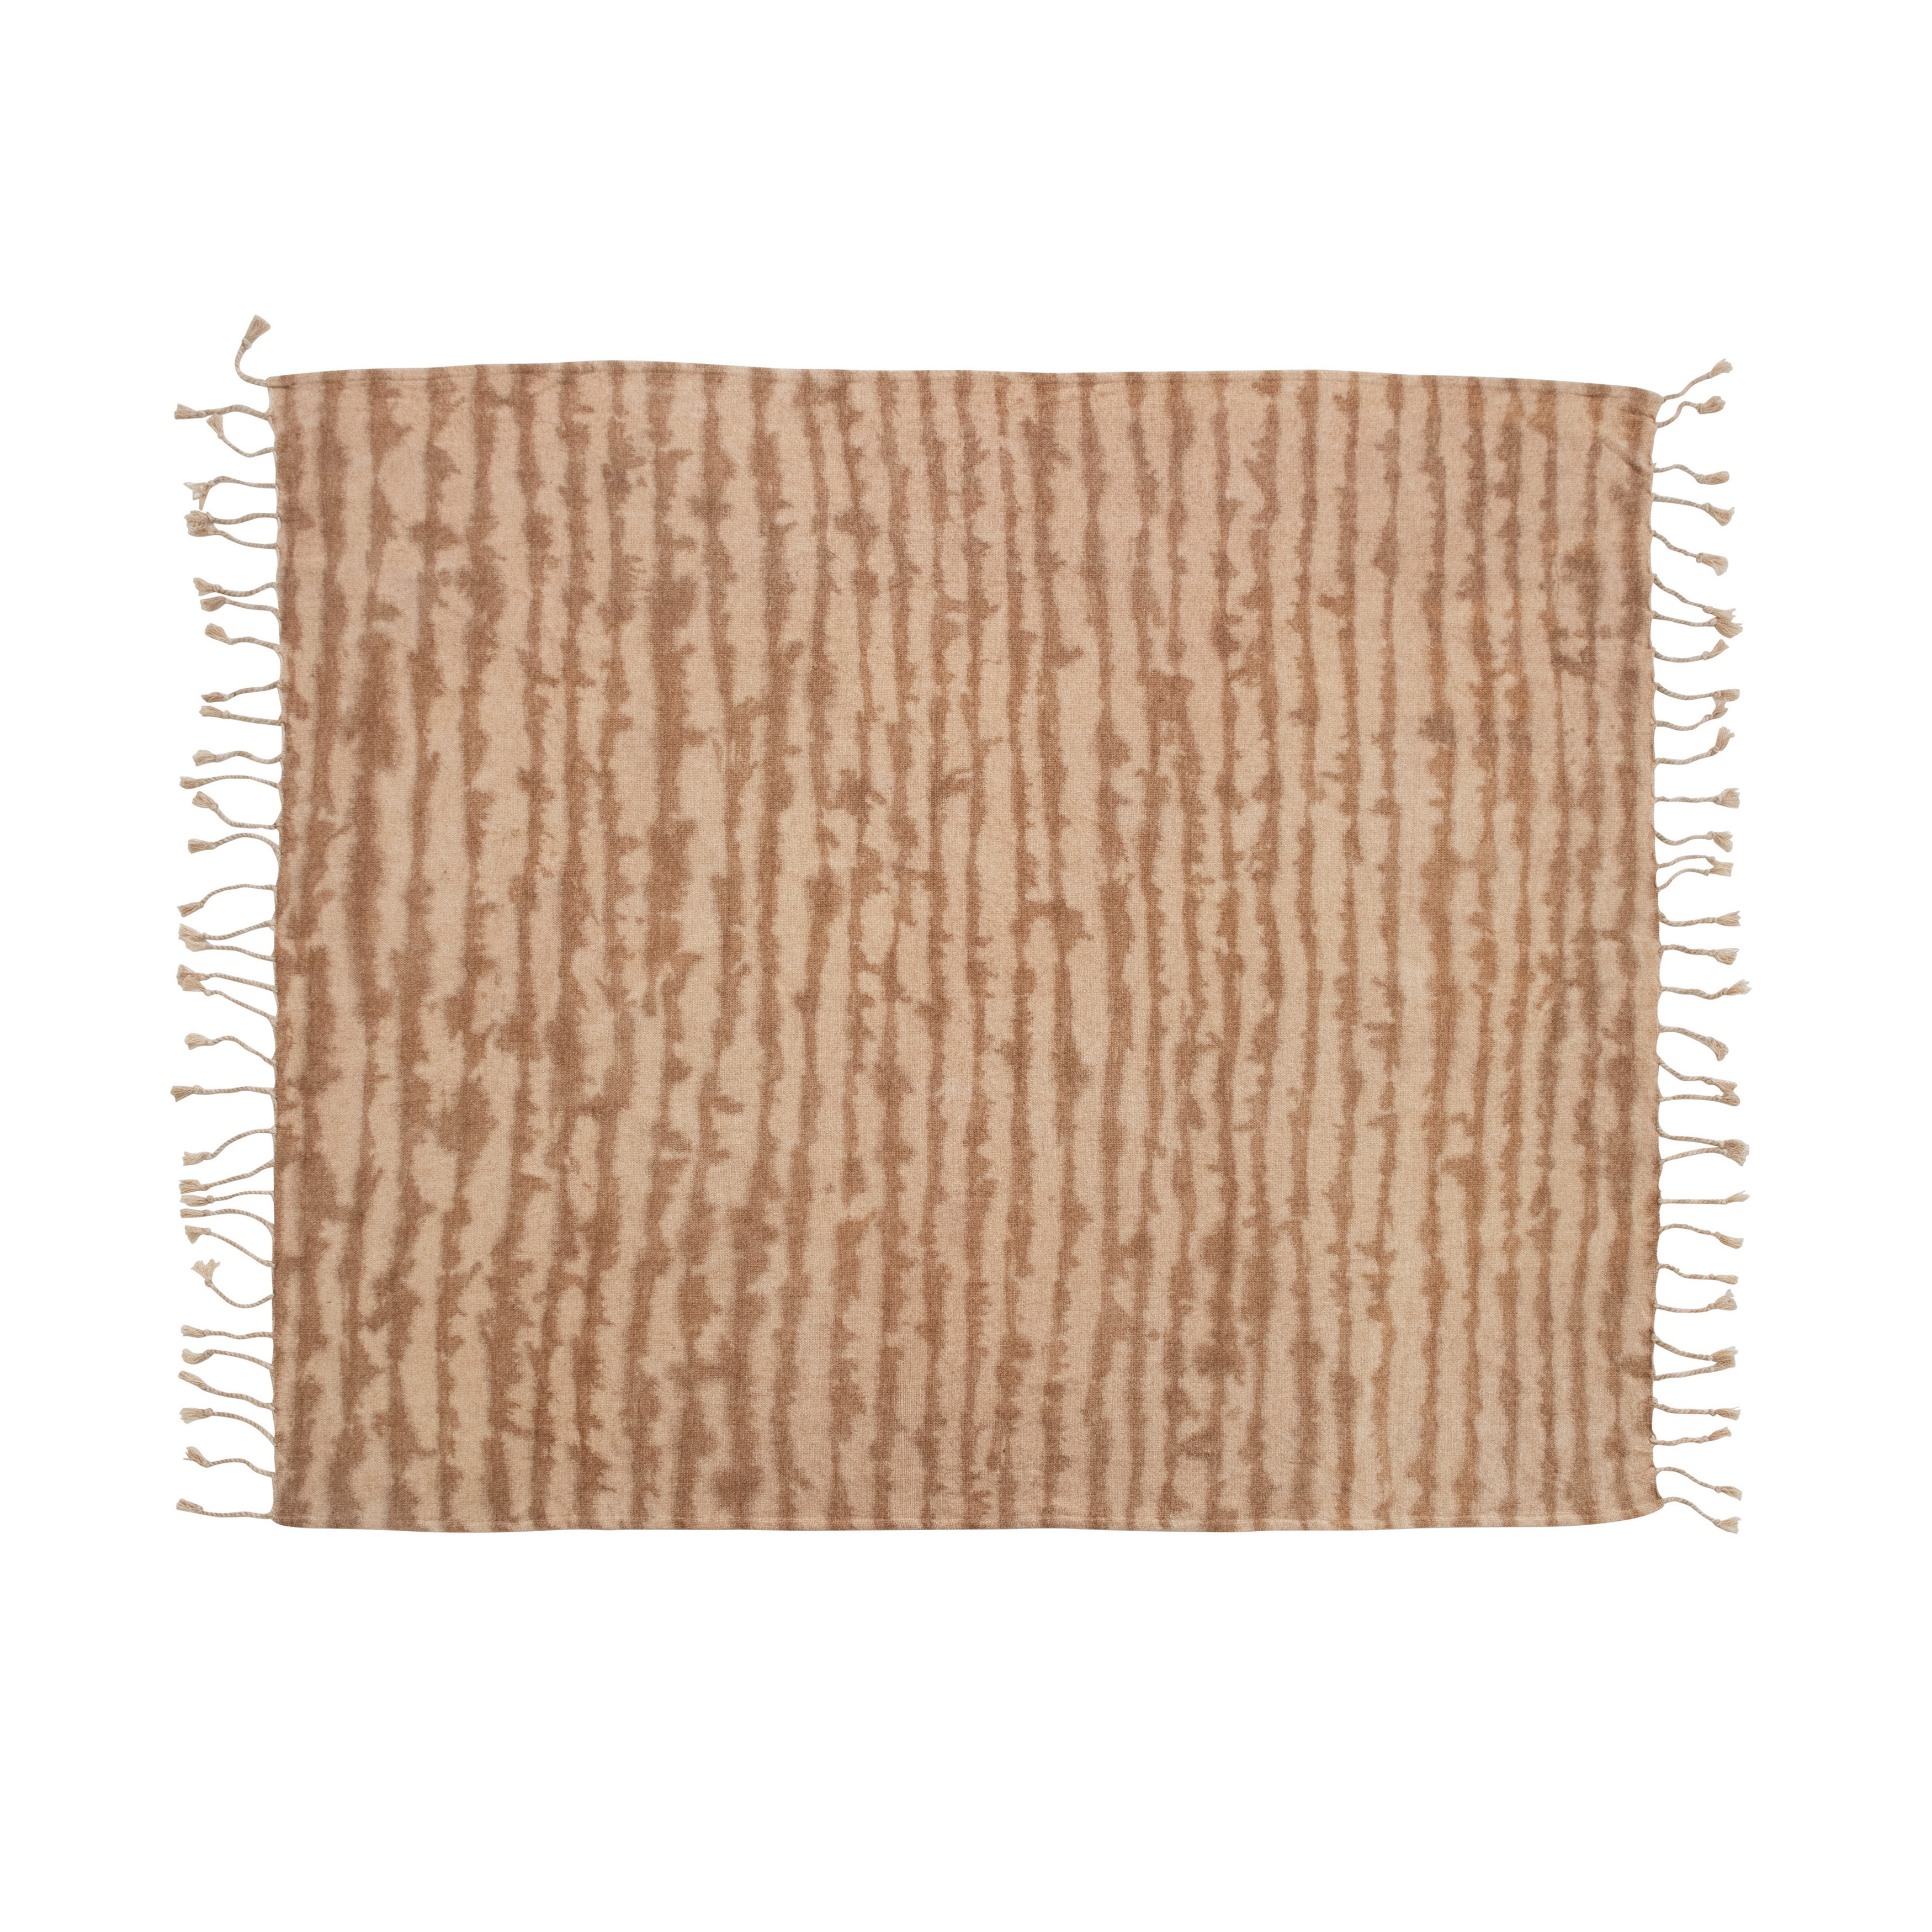 Cotton Blend Tie-Dyed Throw with Tassels, Brown & Beige - Image 0